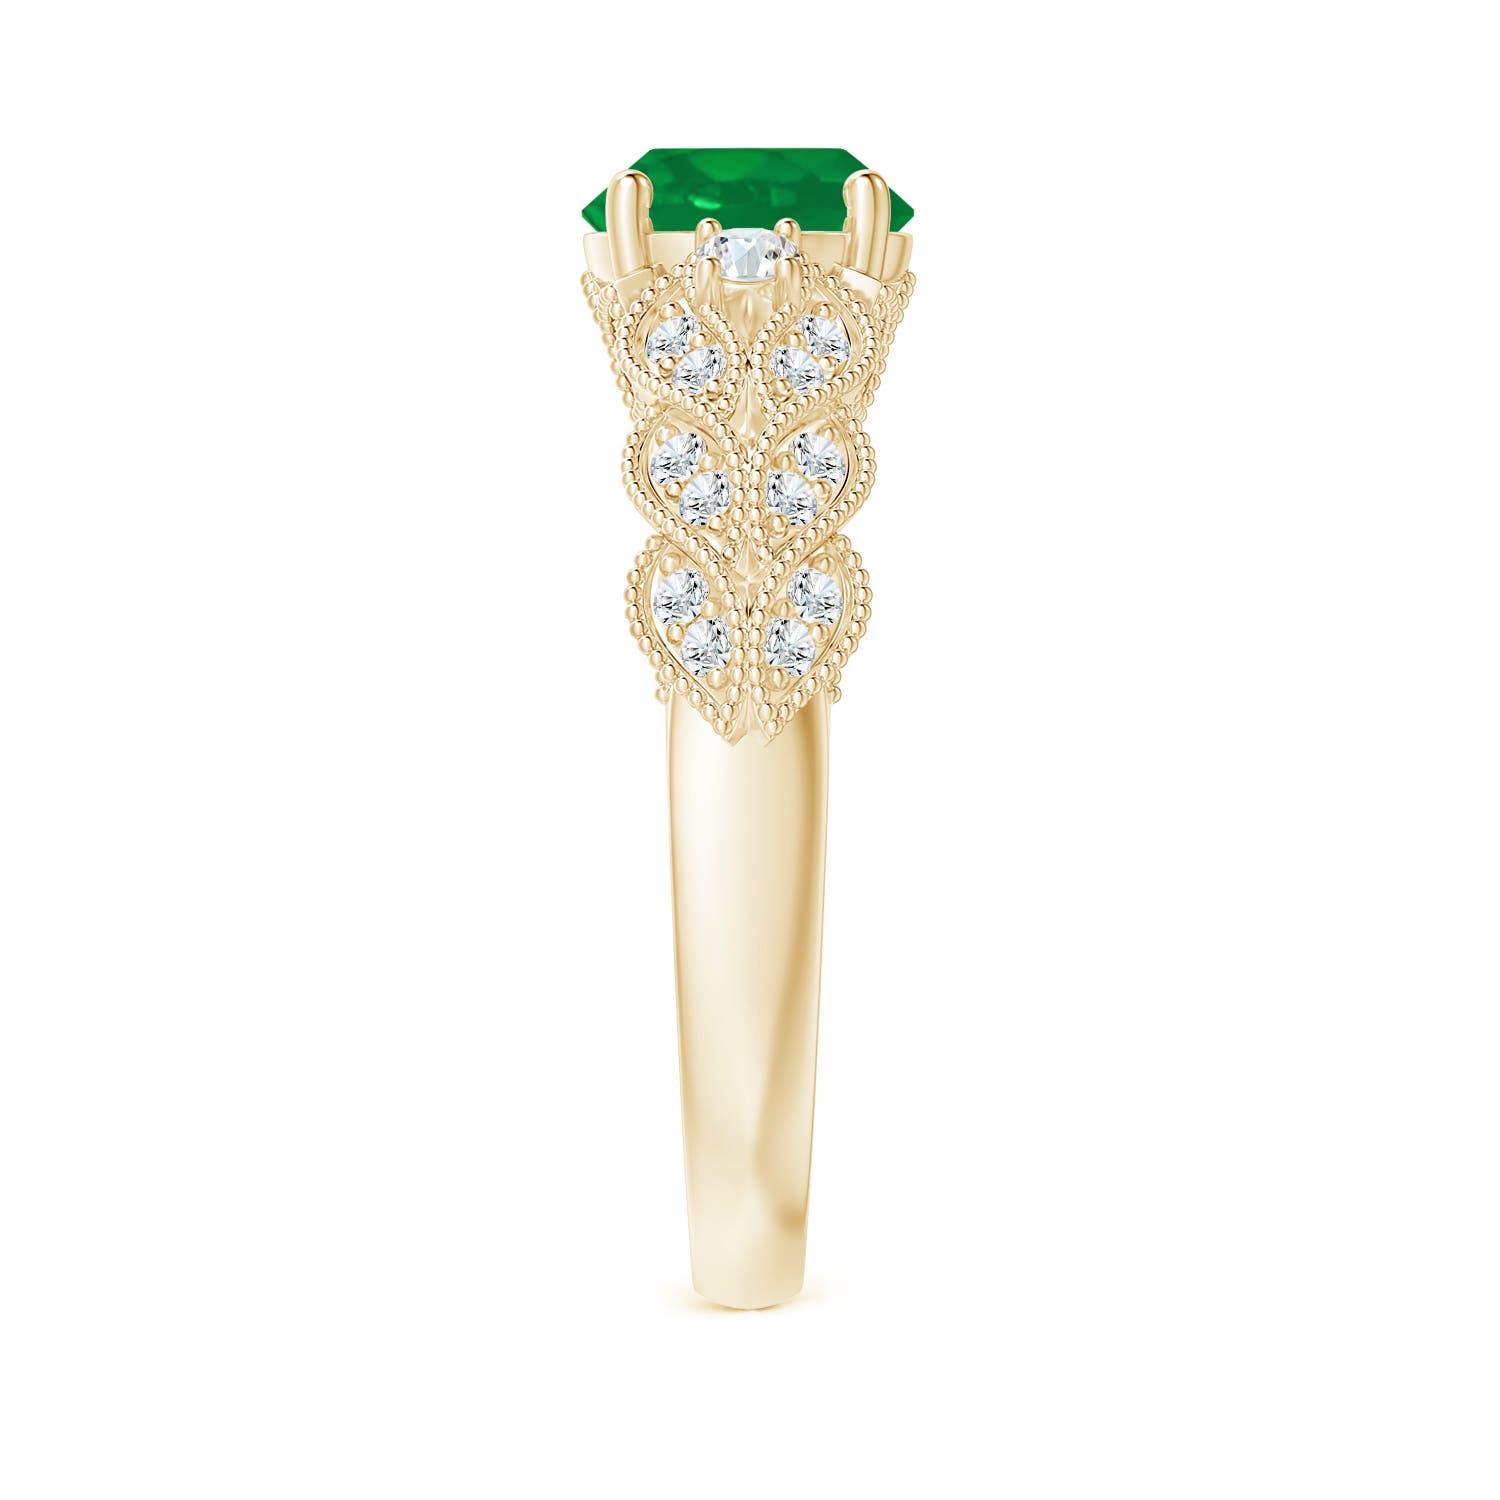 AA - Emerald / 1.47 CT / 14 KT Yellow Gold